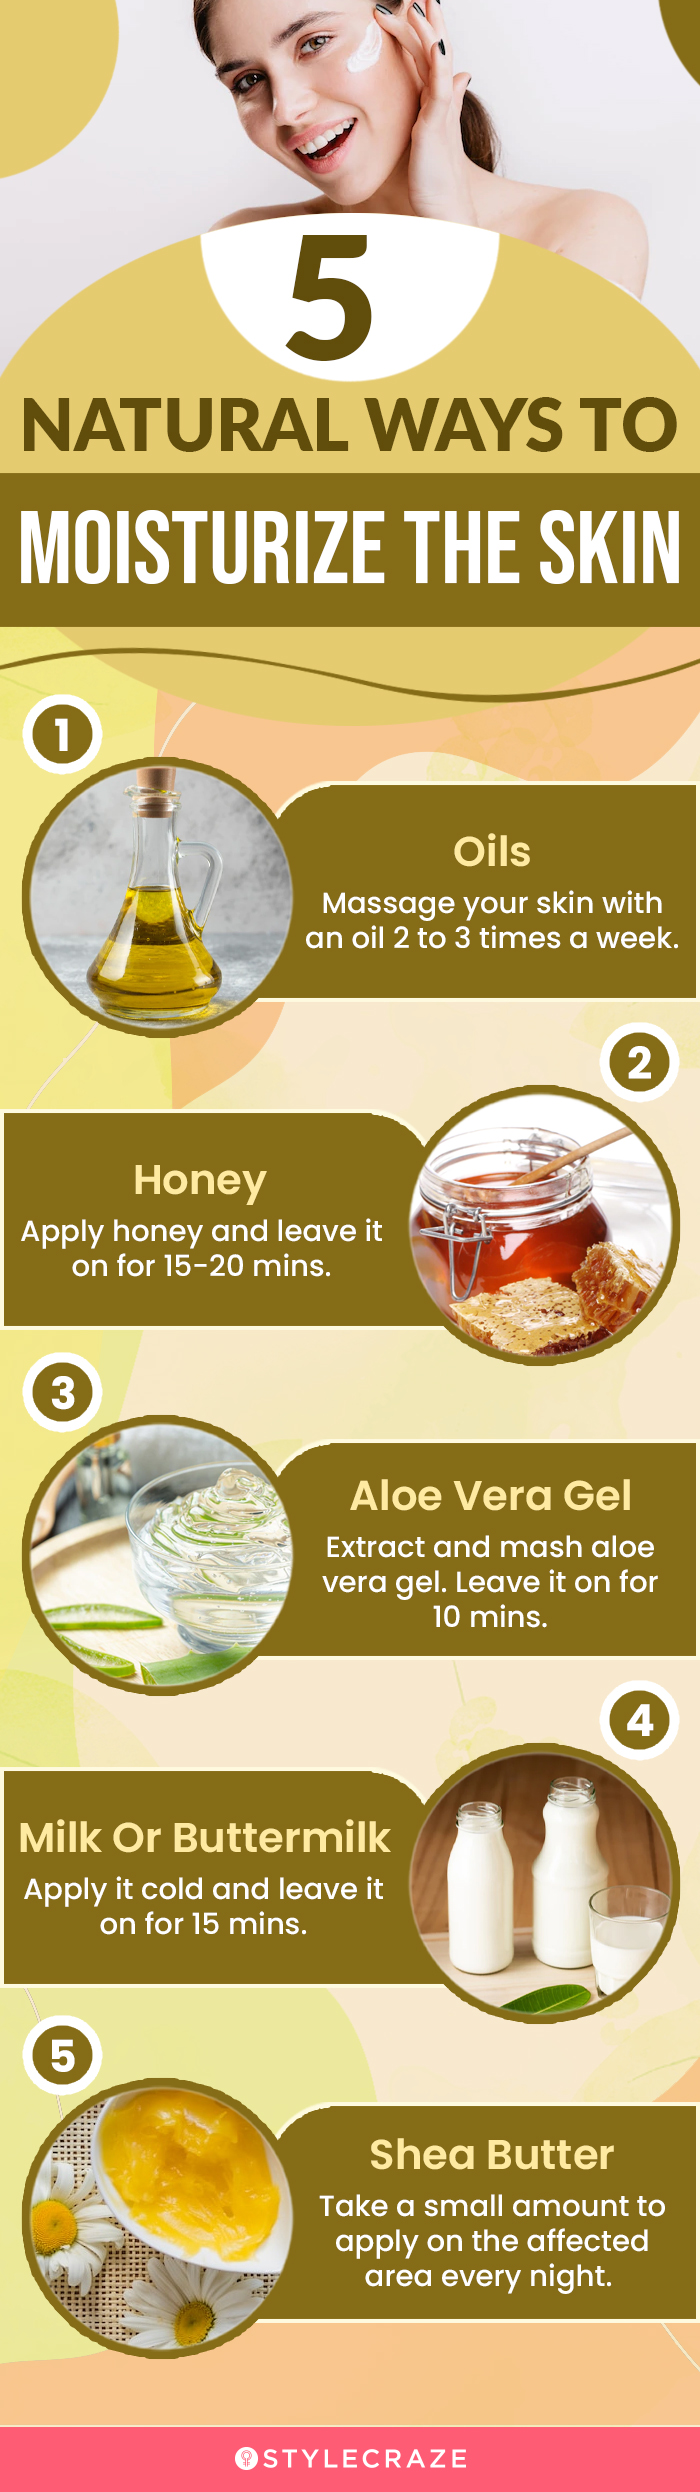 5 natural ways to moisturize skin [infographic]